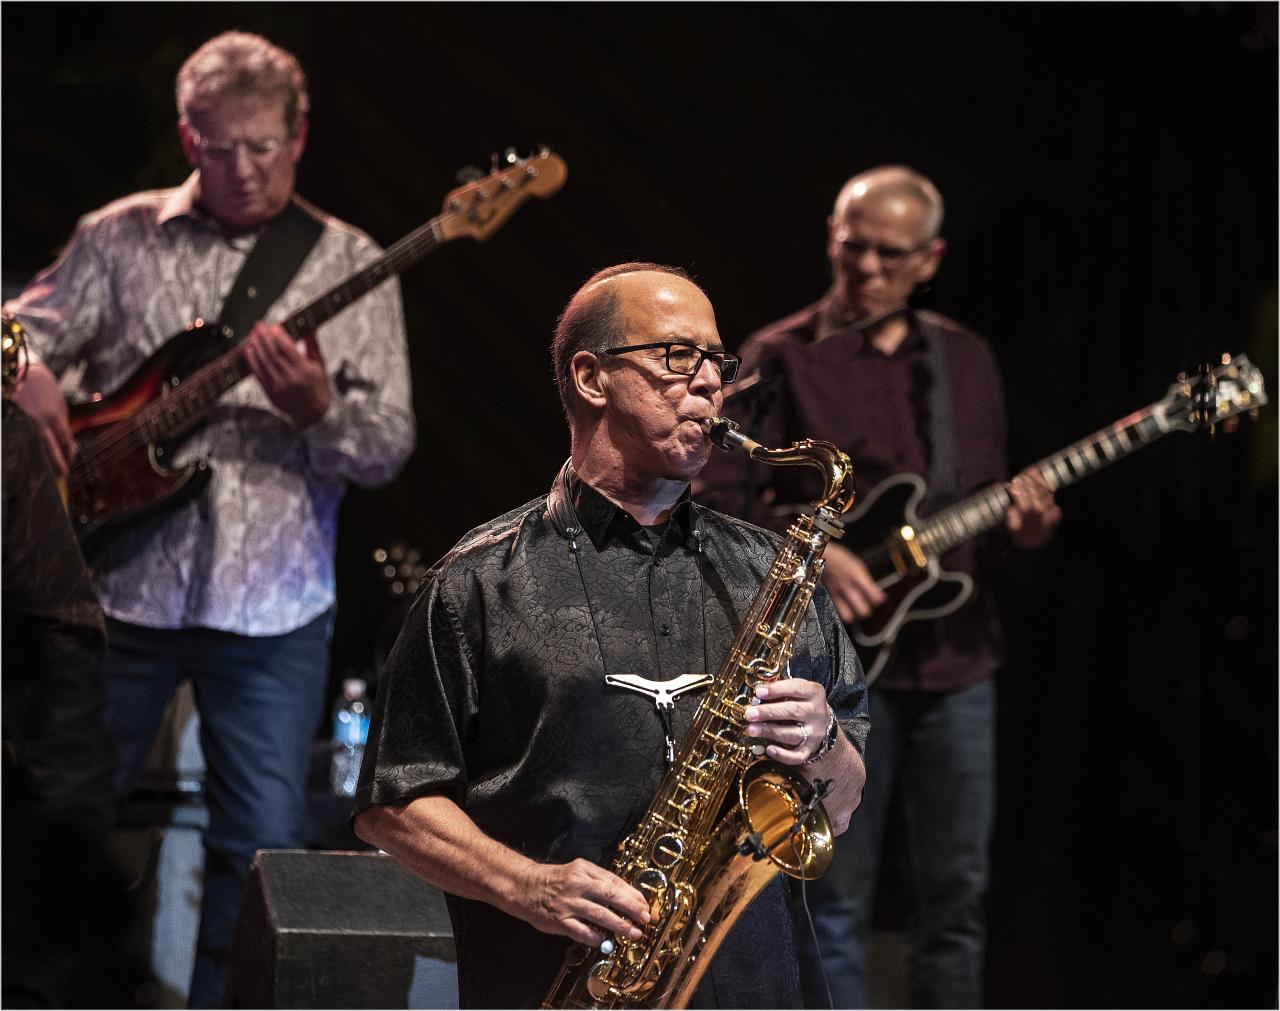 Tower of Power Charts the Remainder of 55th Anniversary Tour